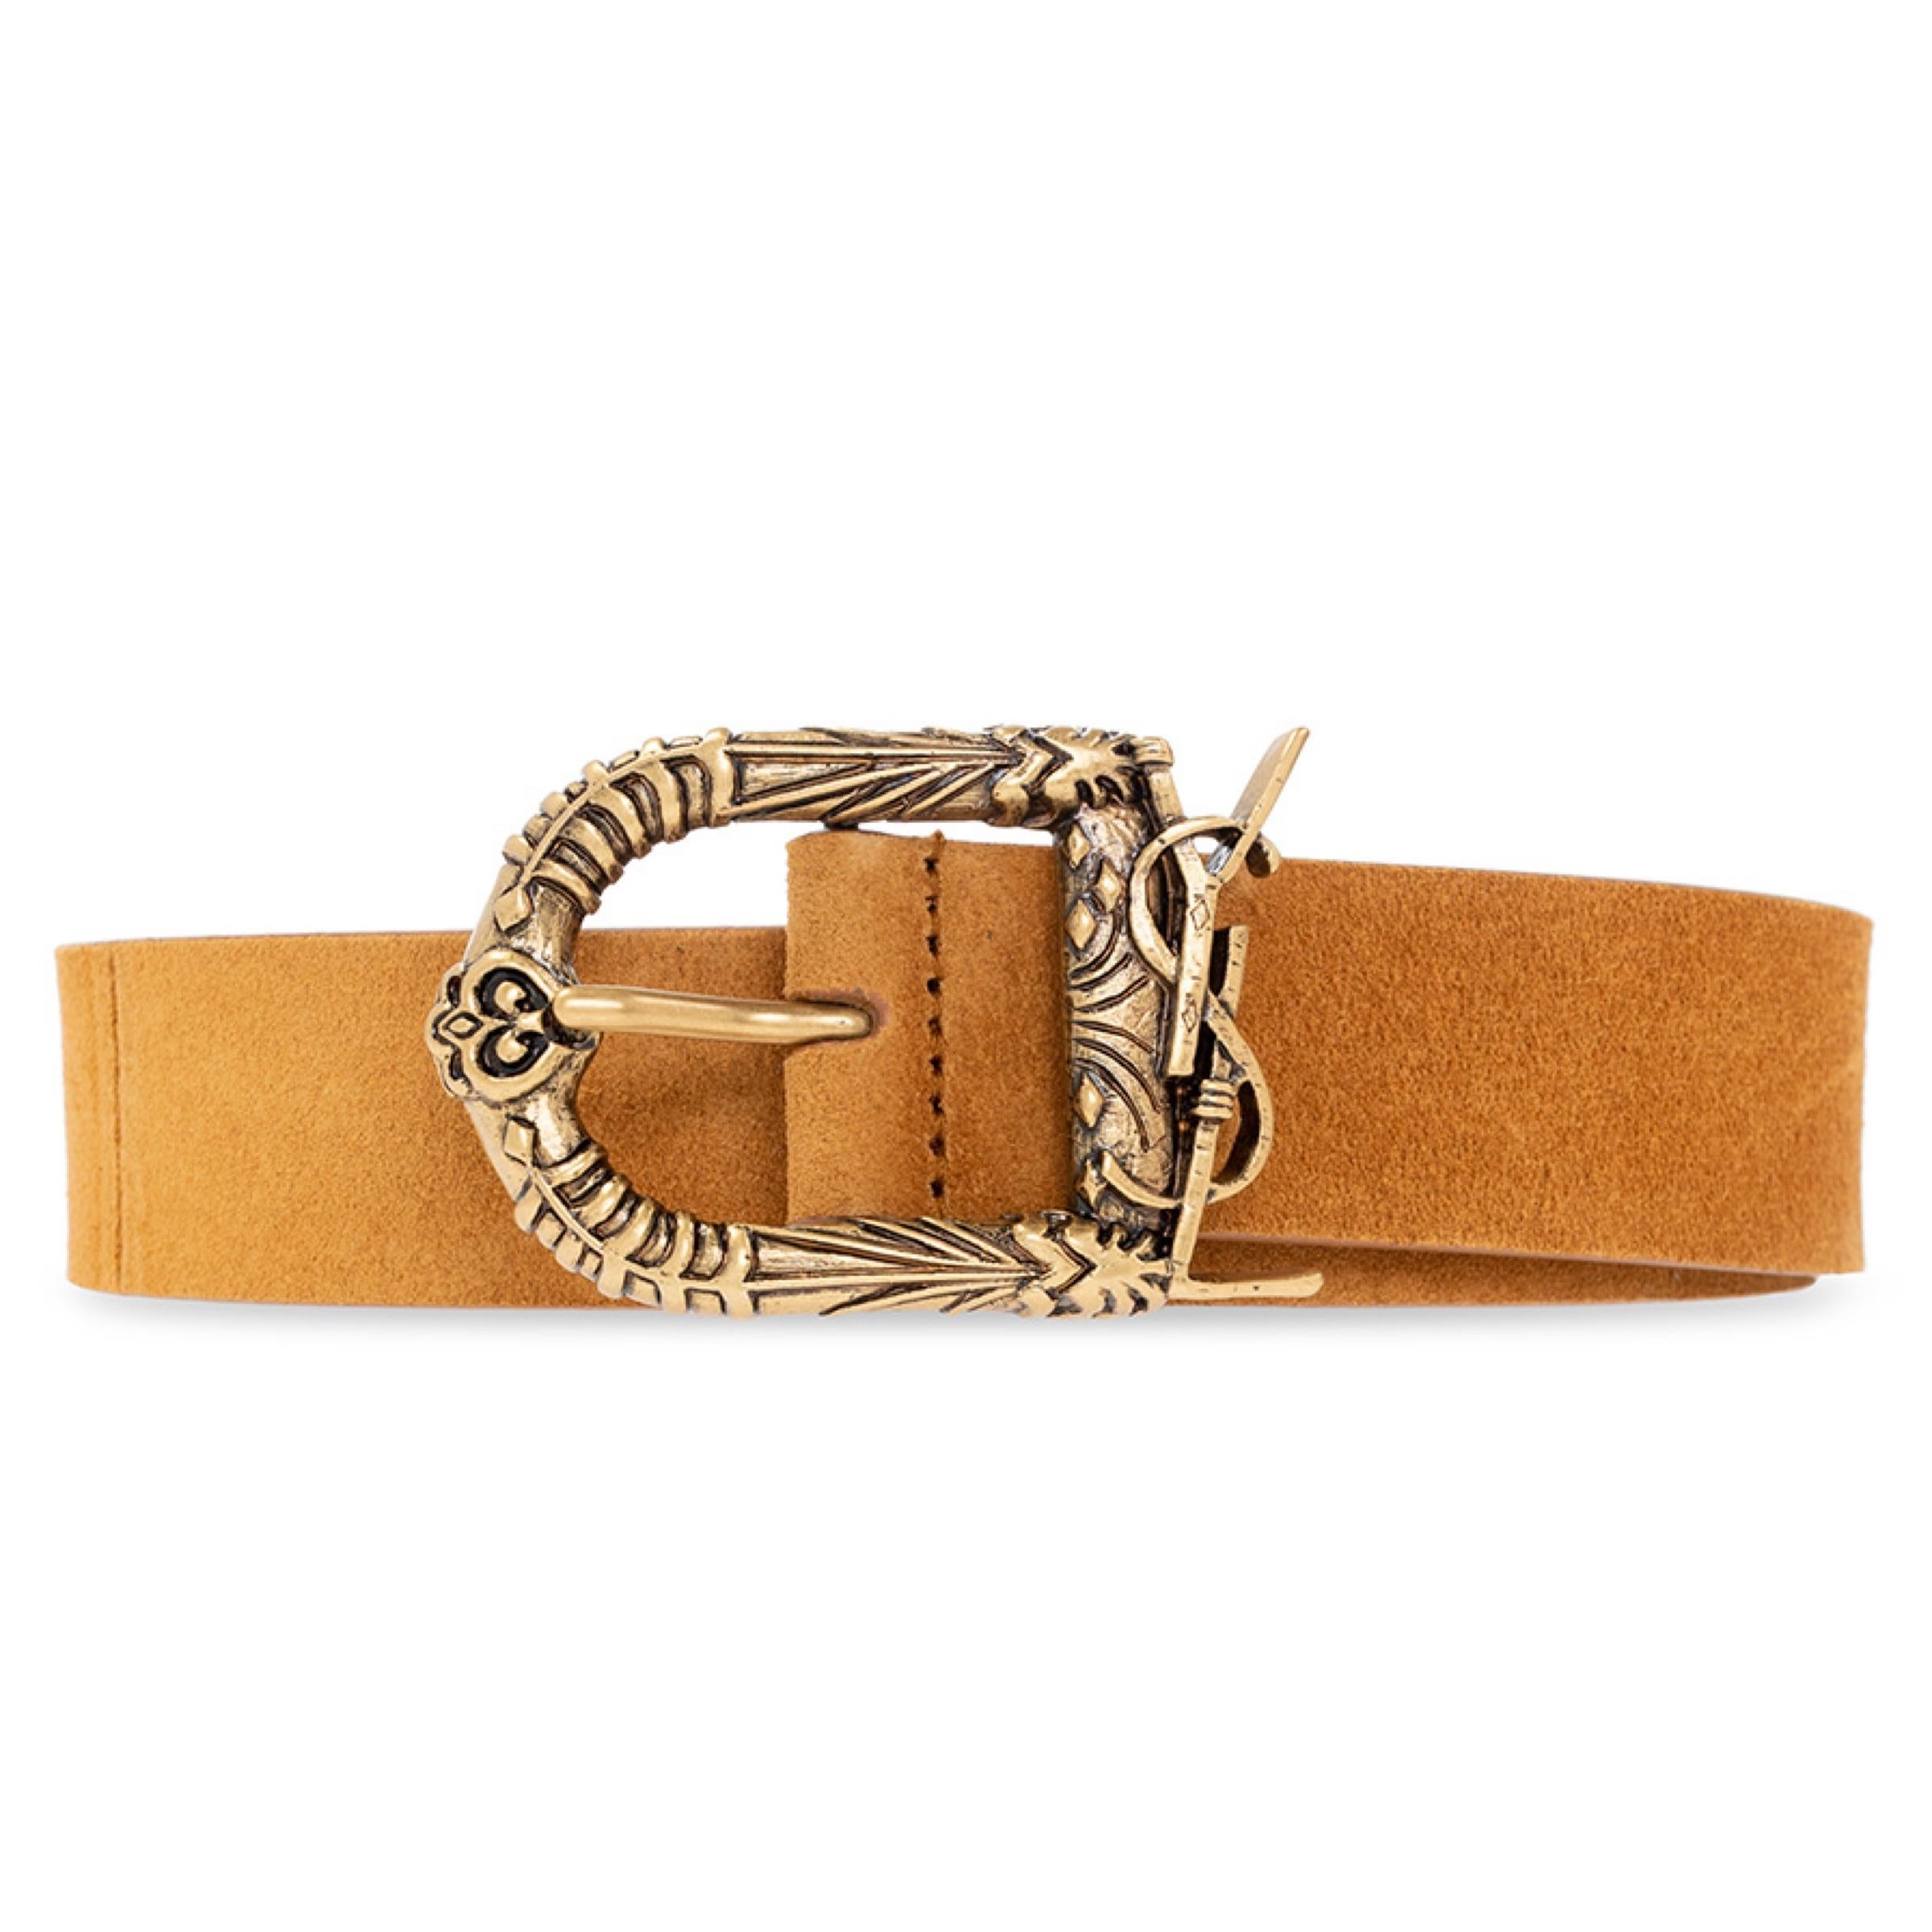 New Saint Laurent Brown Decorative Buckle Leather Belt Size 34 US 85 EU

Authenticity Guaranteed

DETAILS
Brand: Saint Laurent
Condition: Brand new
Gender: Women
Category: Belt
Color: Brown
Material: Leather
Front YSL logo
Decorative buckle
Made in